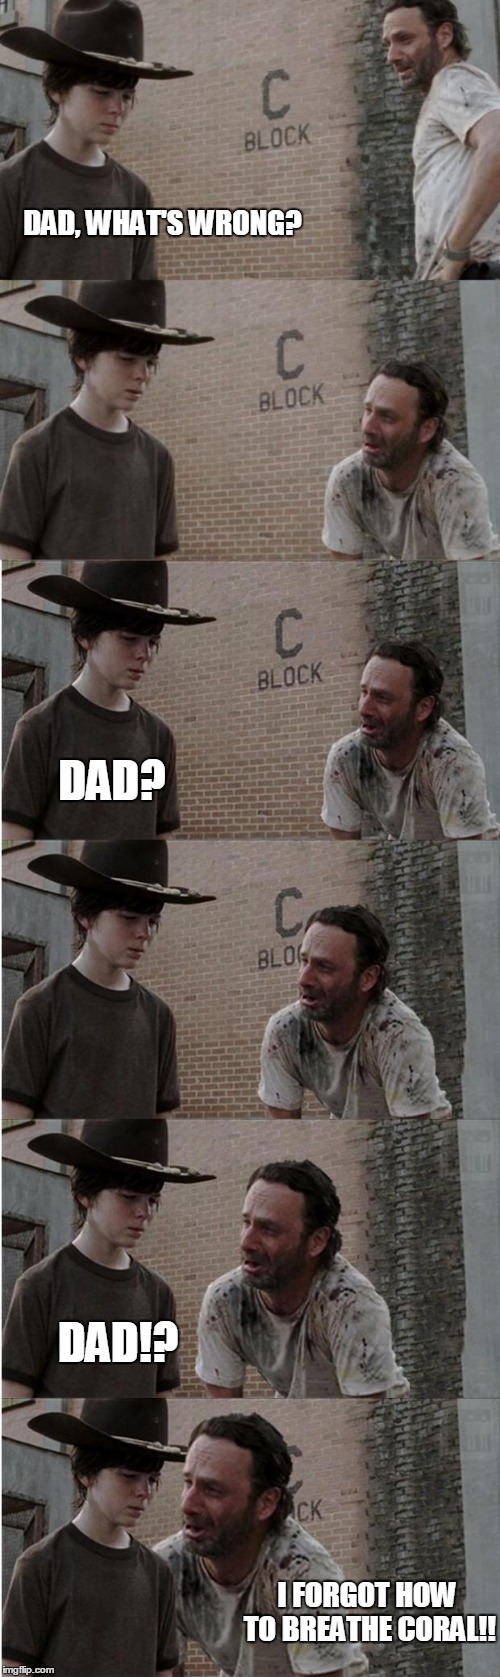 Rick and Carl Longer Meme | DAD, WHAT'S WRONG? DAD? DAD!? I FORGOT HOW TO BREATHE CORAL!! | image tagged in memes,rick and carl longer | made w/ Imgflip meme maker